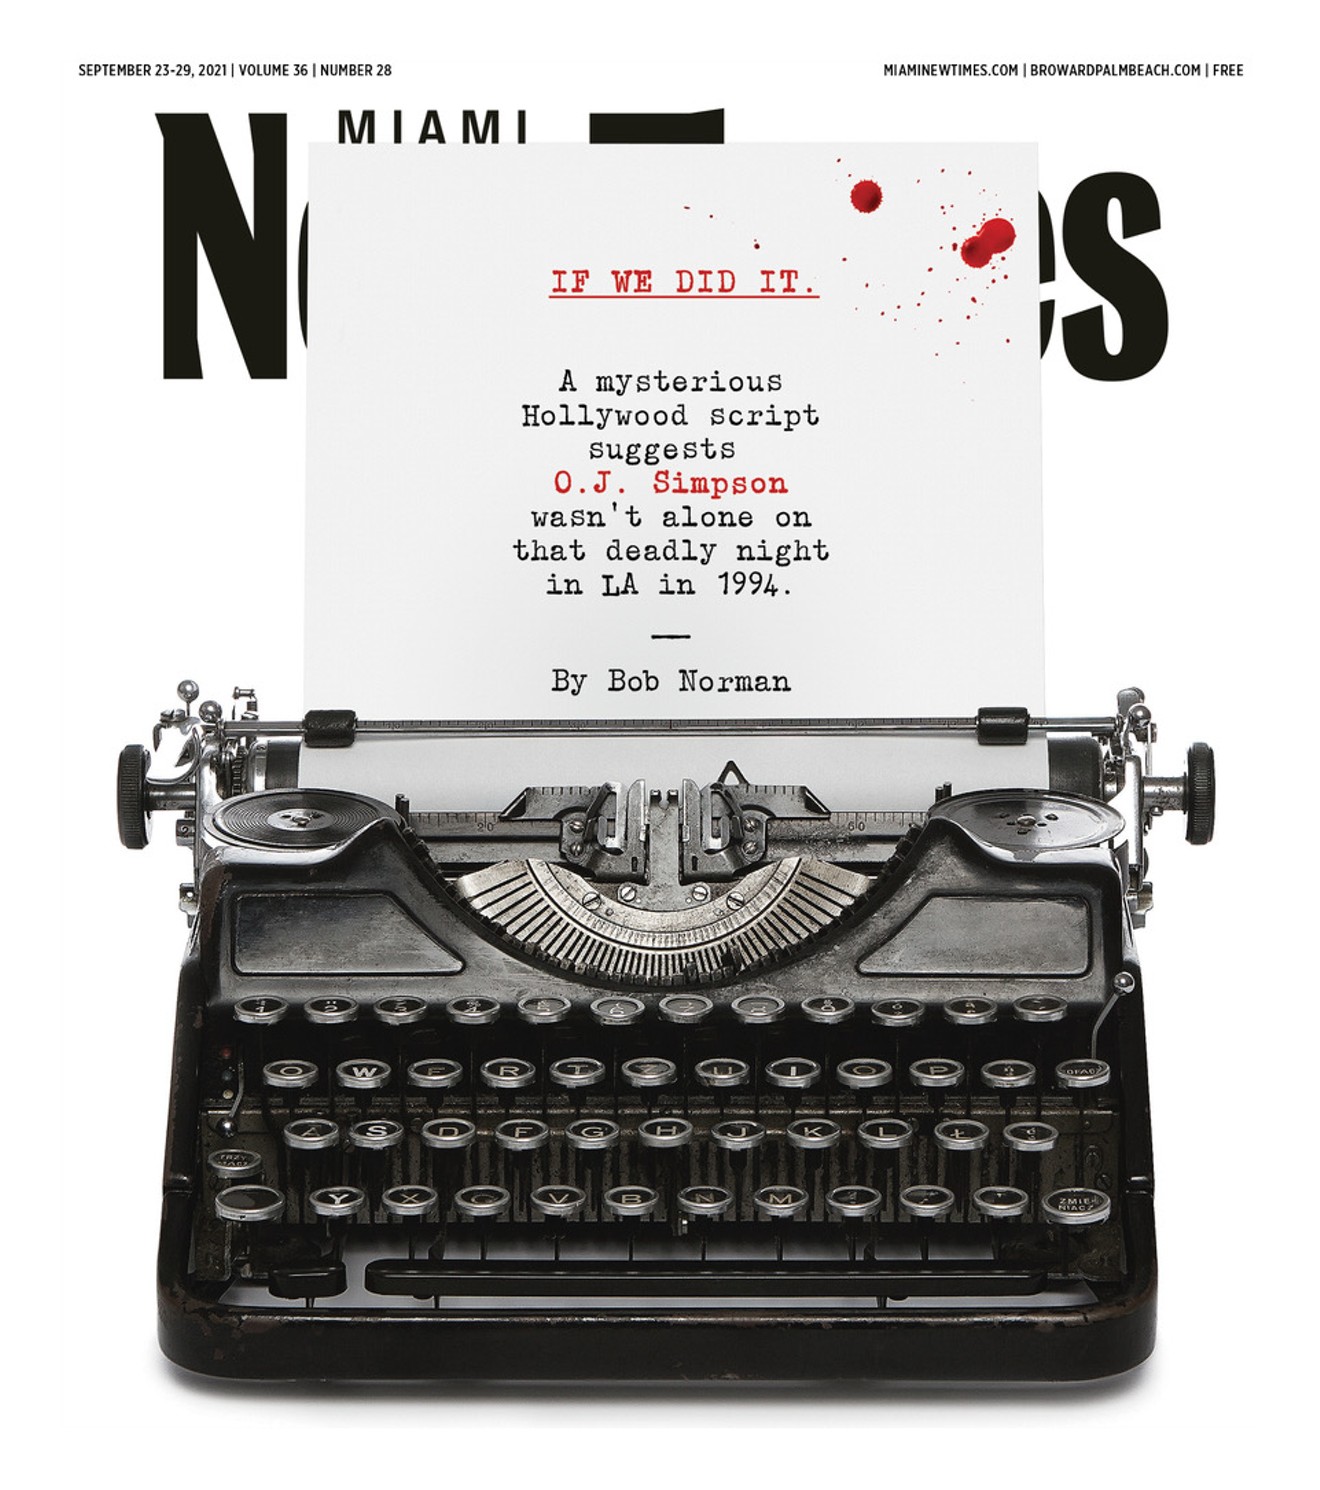 The cover of the September 23, 2021, issue of Miami New Times